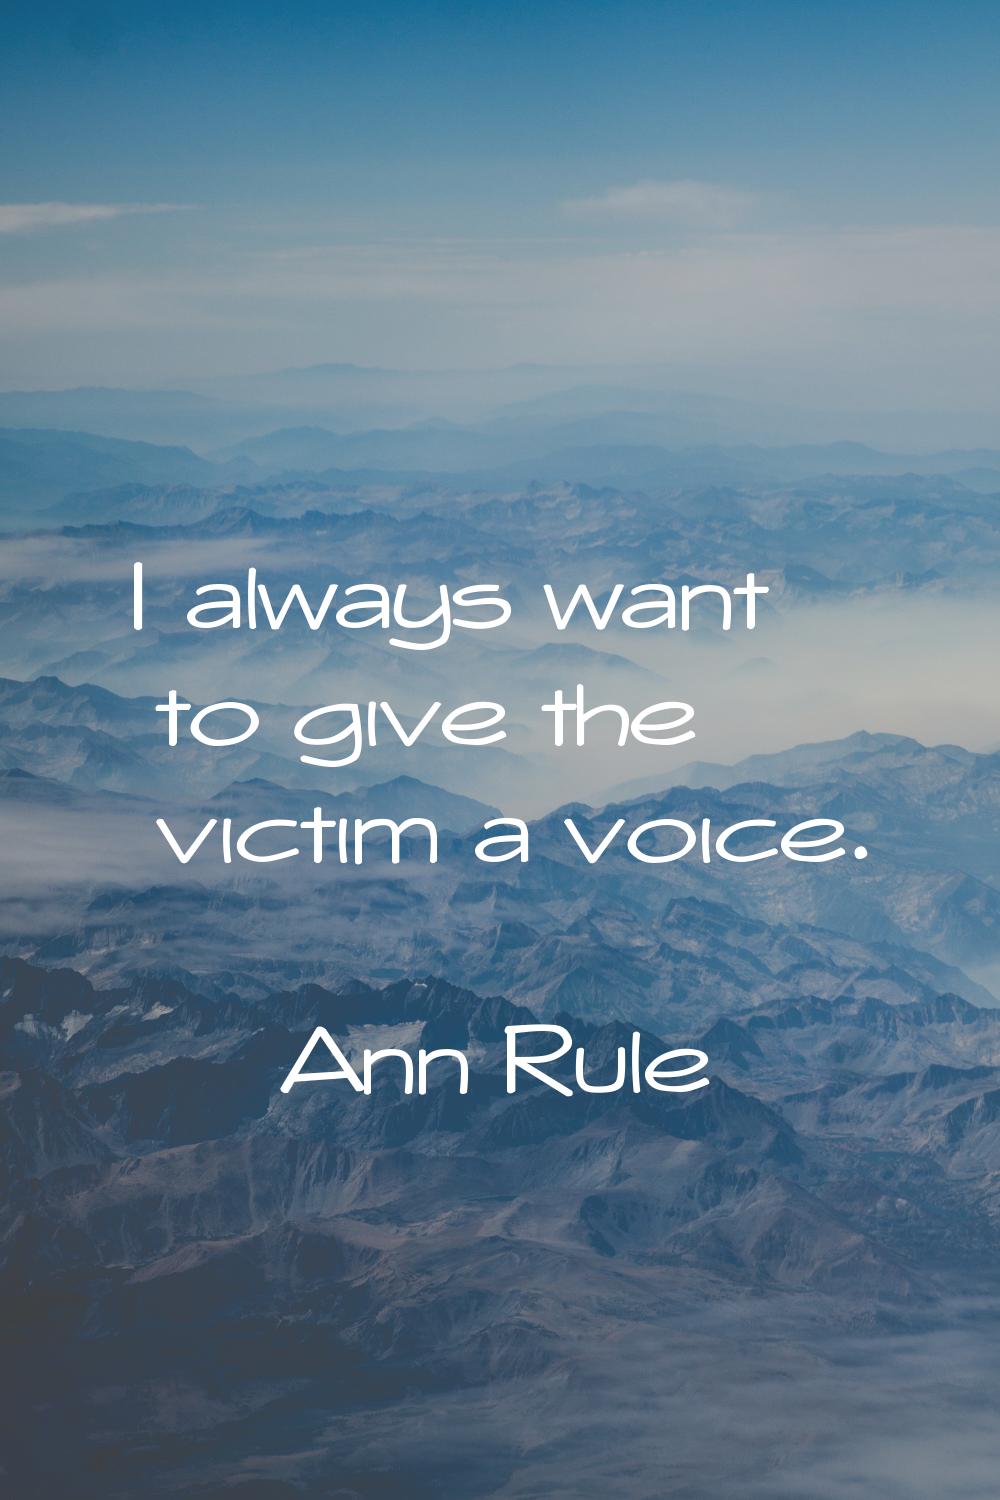 I always want to give the victim a voice.